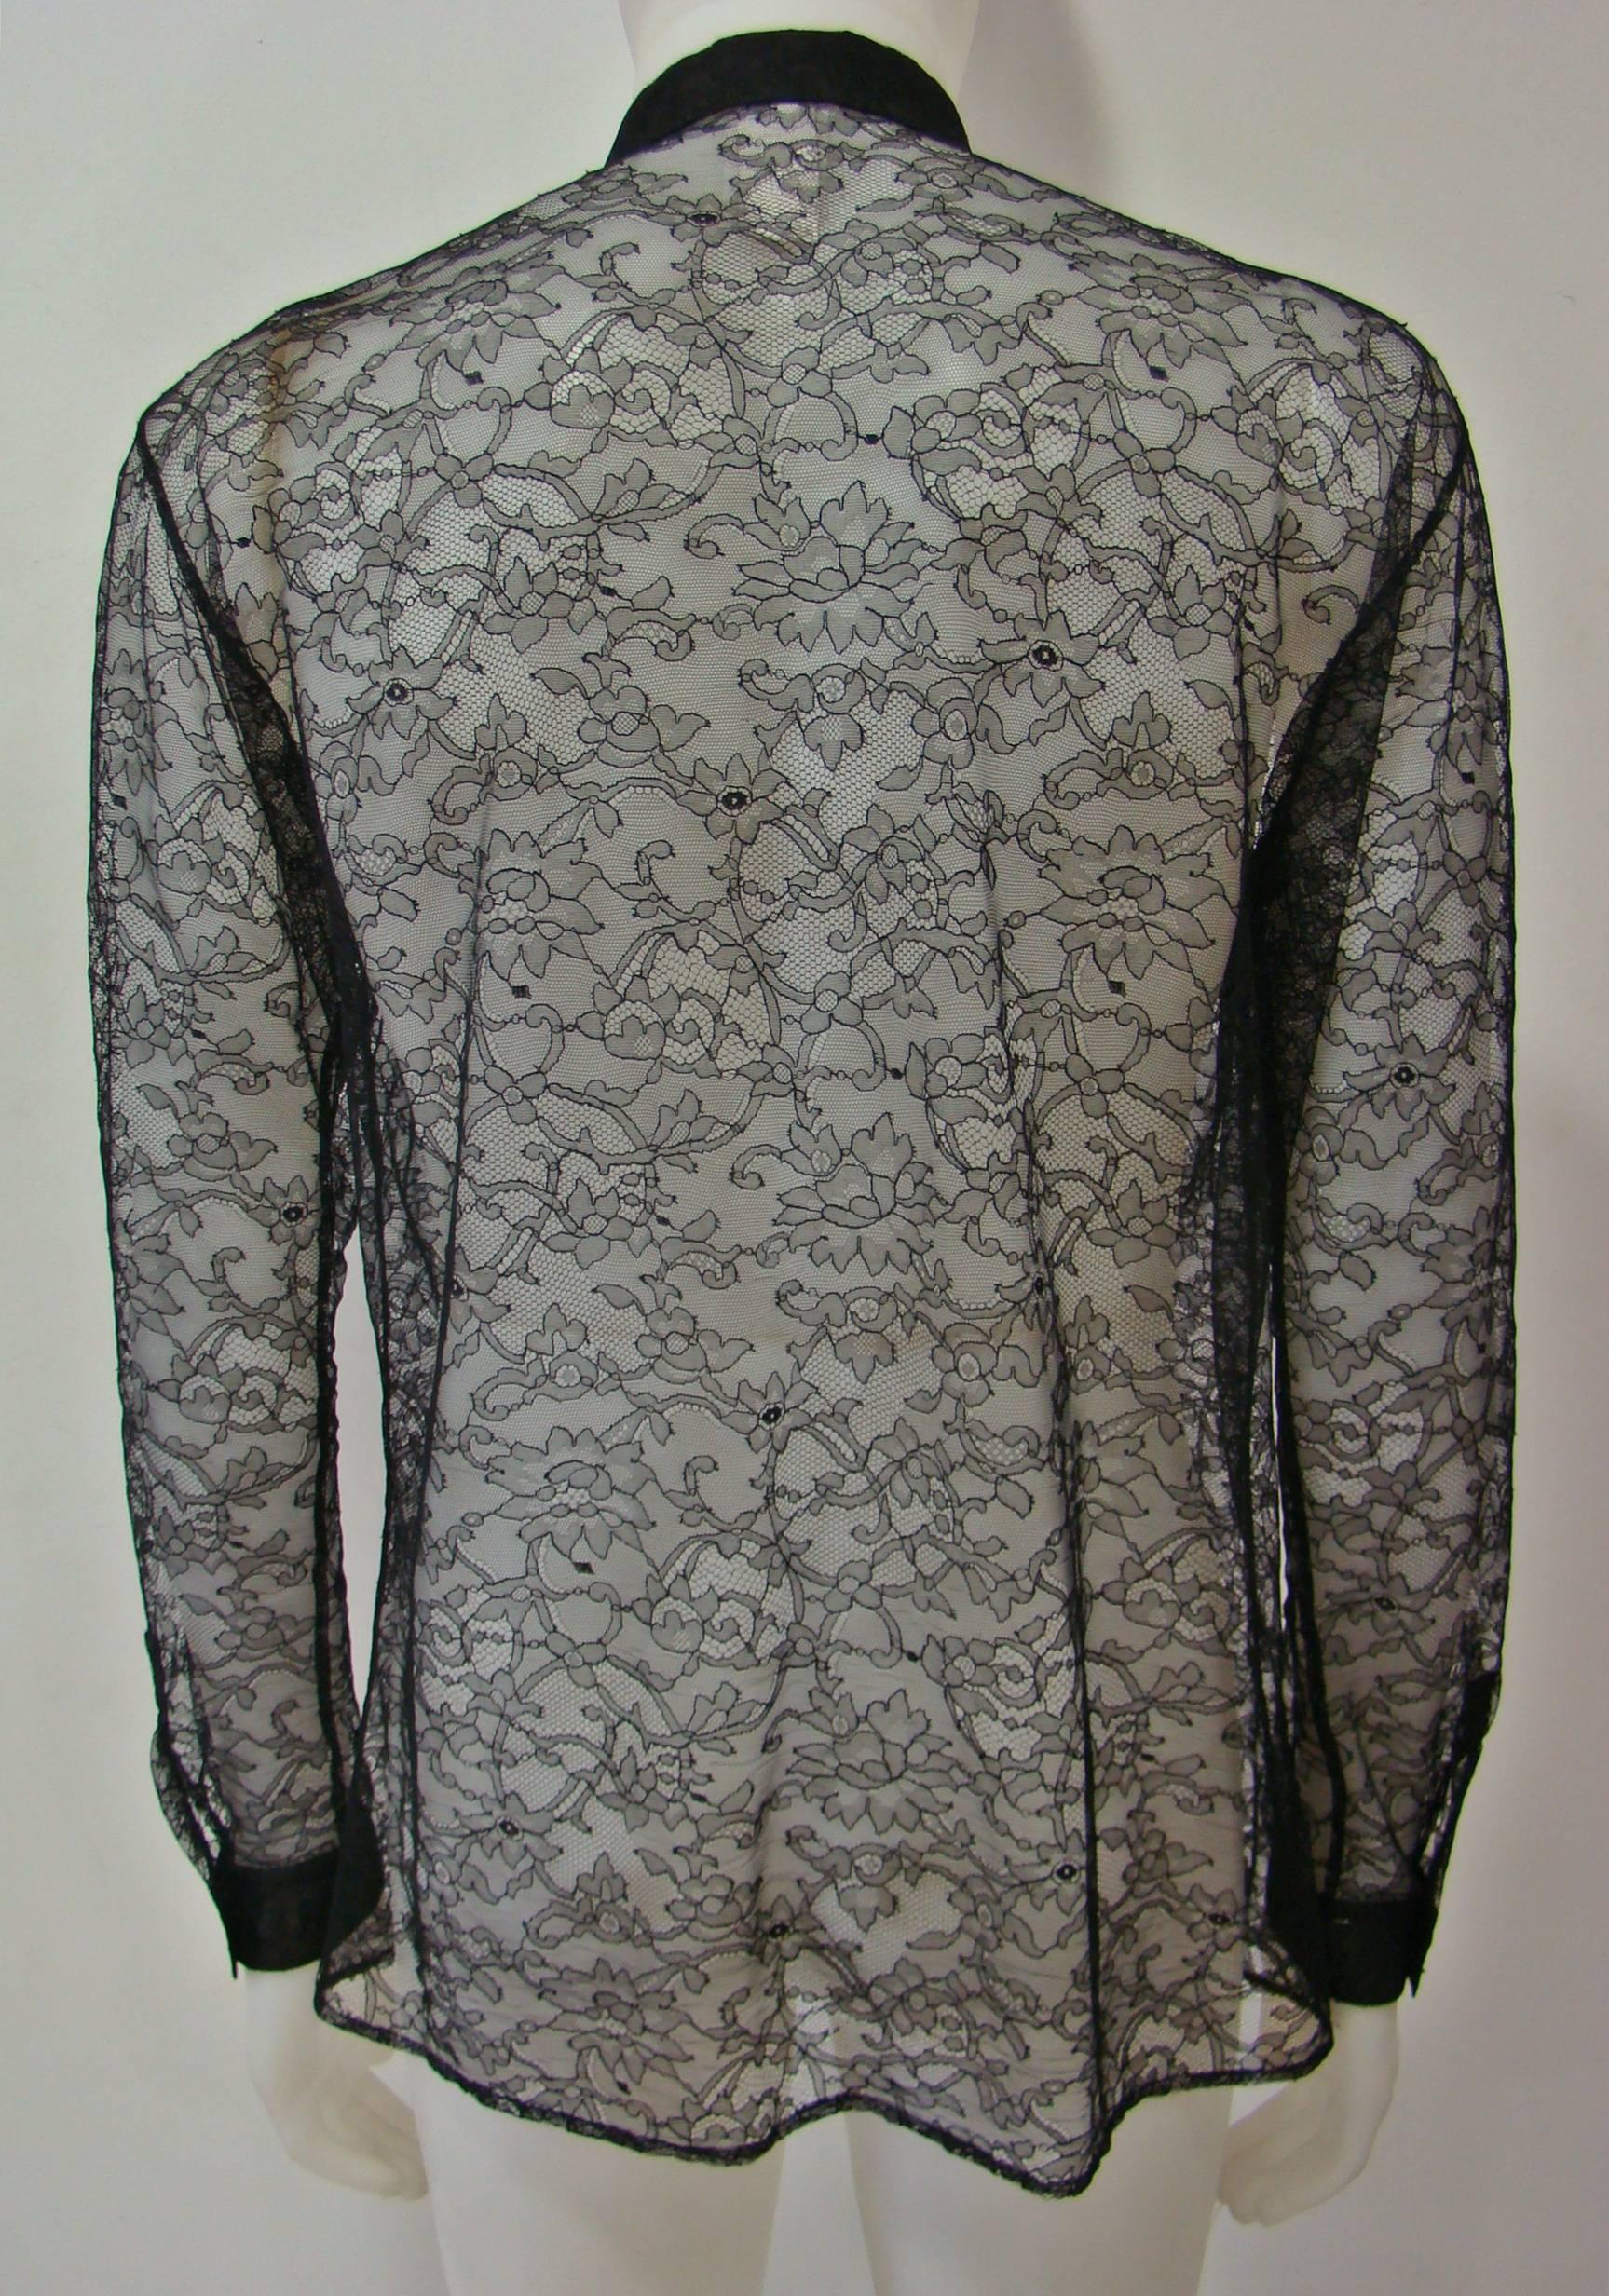 Men's Iconic Gianni Versace Silk Lace Punk Collection Shirt Spring 1994 For Sale